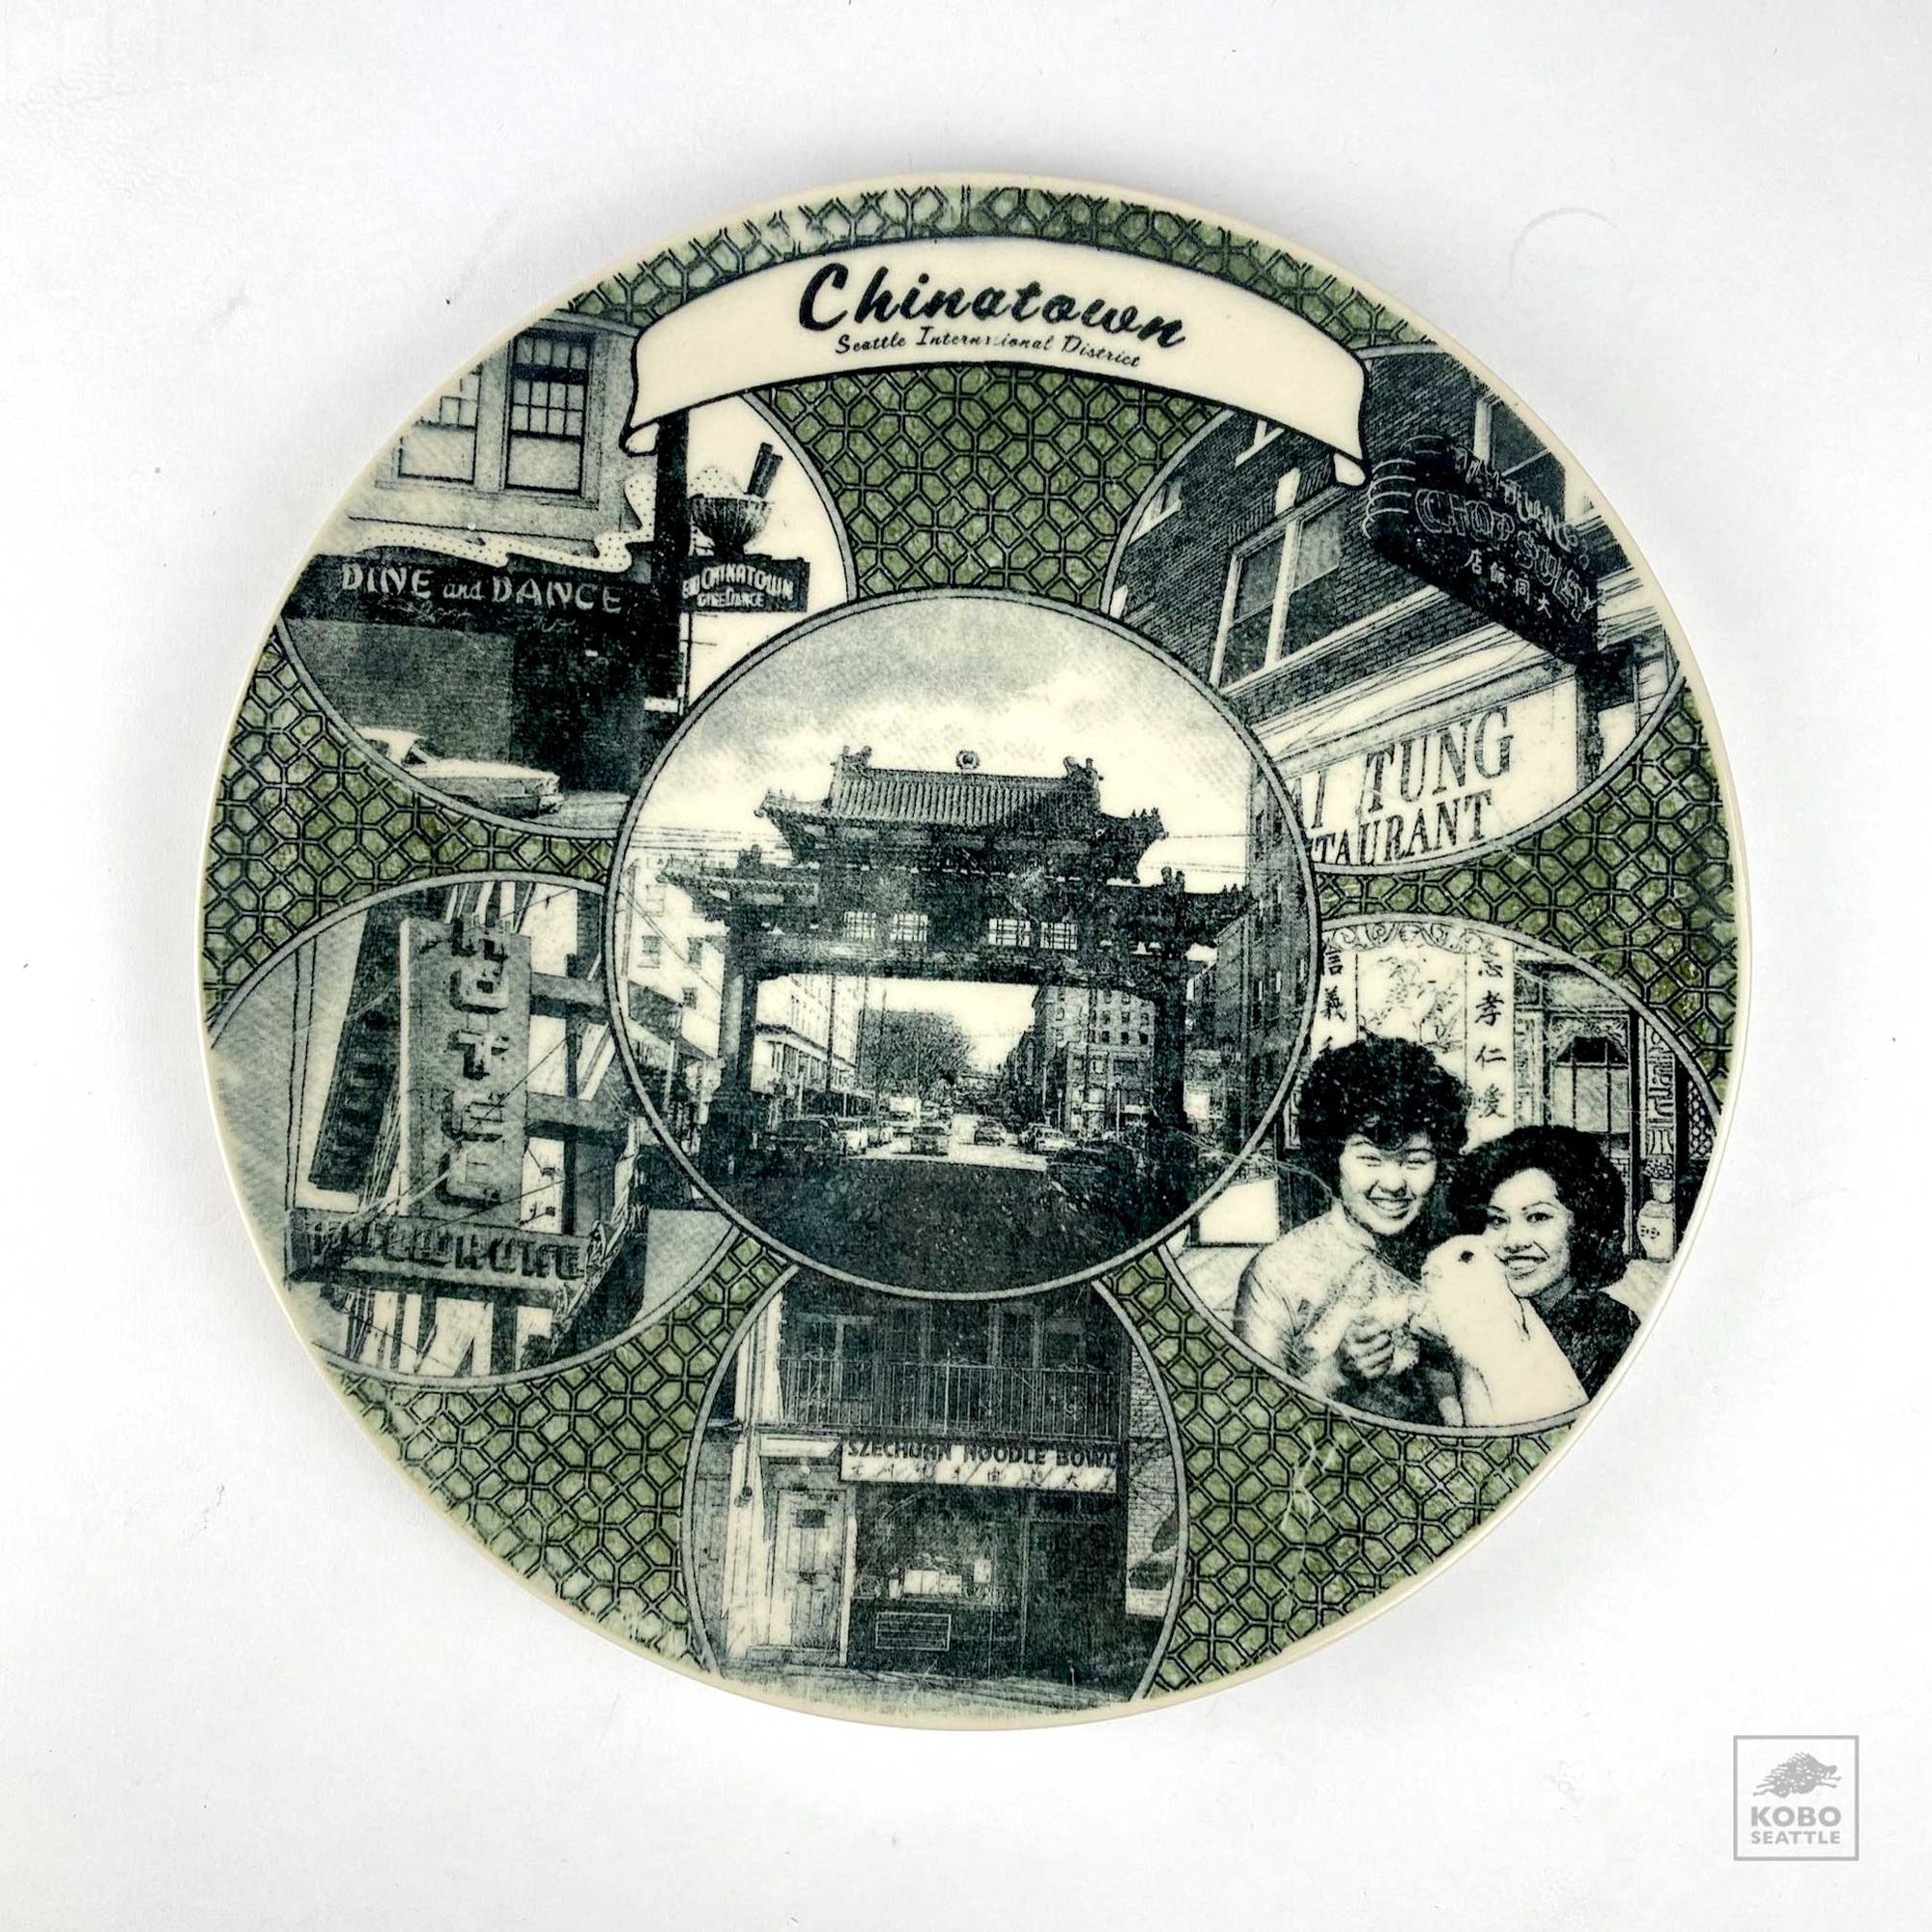 Chinatown Seattle Souvenir Plate by Laura Brodax